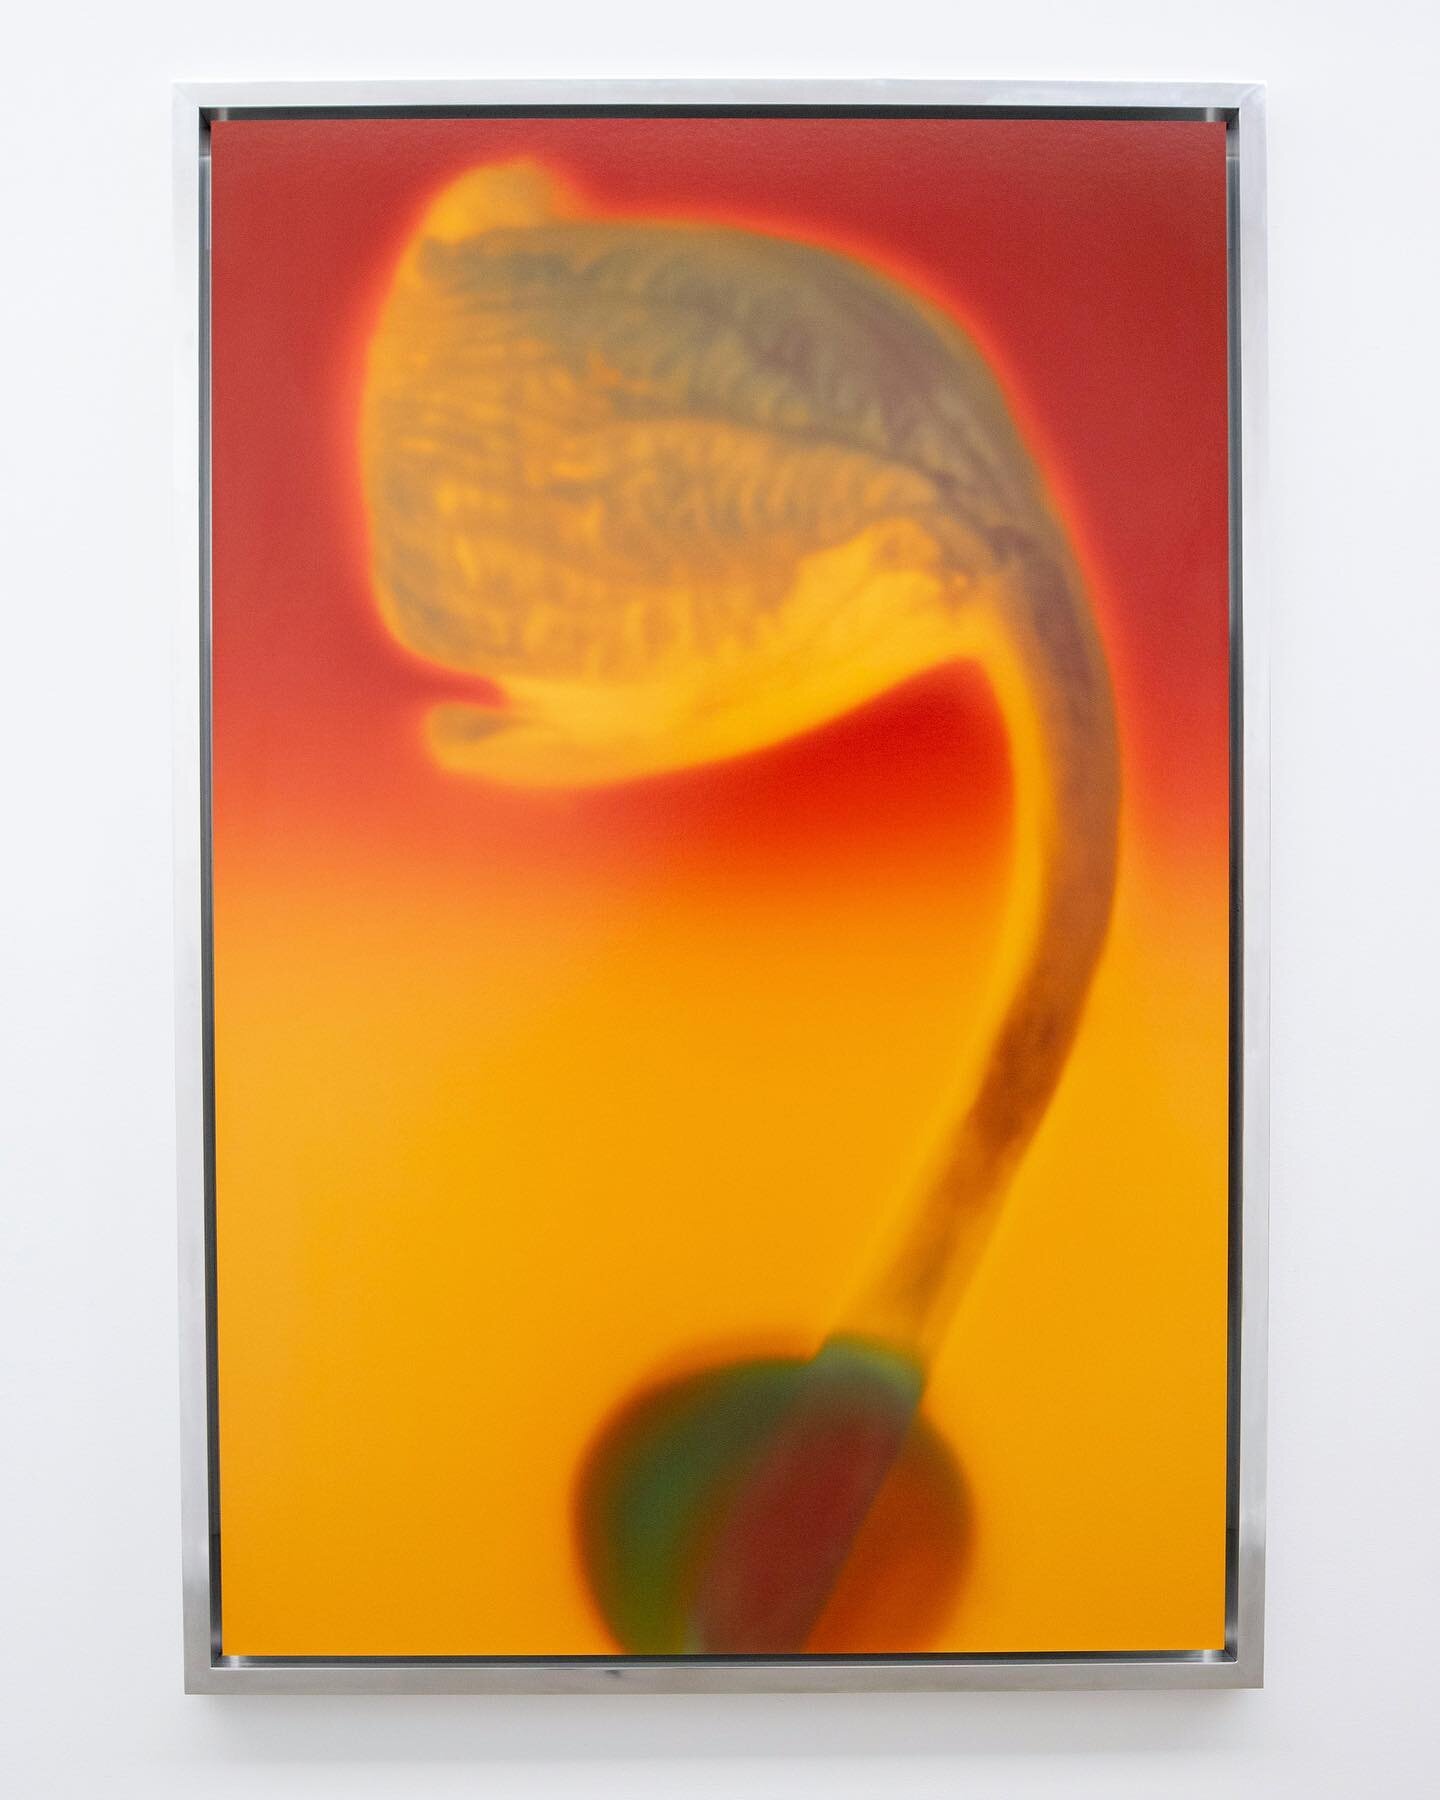 Francisco Tavoni 

Sentient Beings

On view through June 4, 2023

Pictured:

Francisco Tavoni Cantharellus Concinnus, 2023 Ditone print on baryta rag wax coated with artist's aluminum frame 
69h x 47w in 

Francisco Tavoni Hidden Message, 2023 Ditone